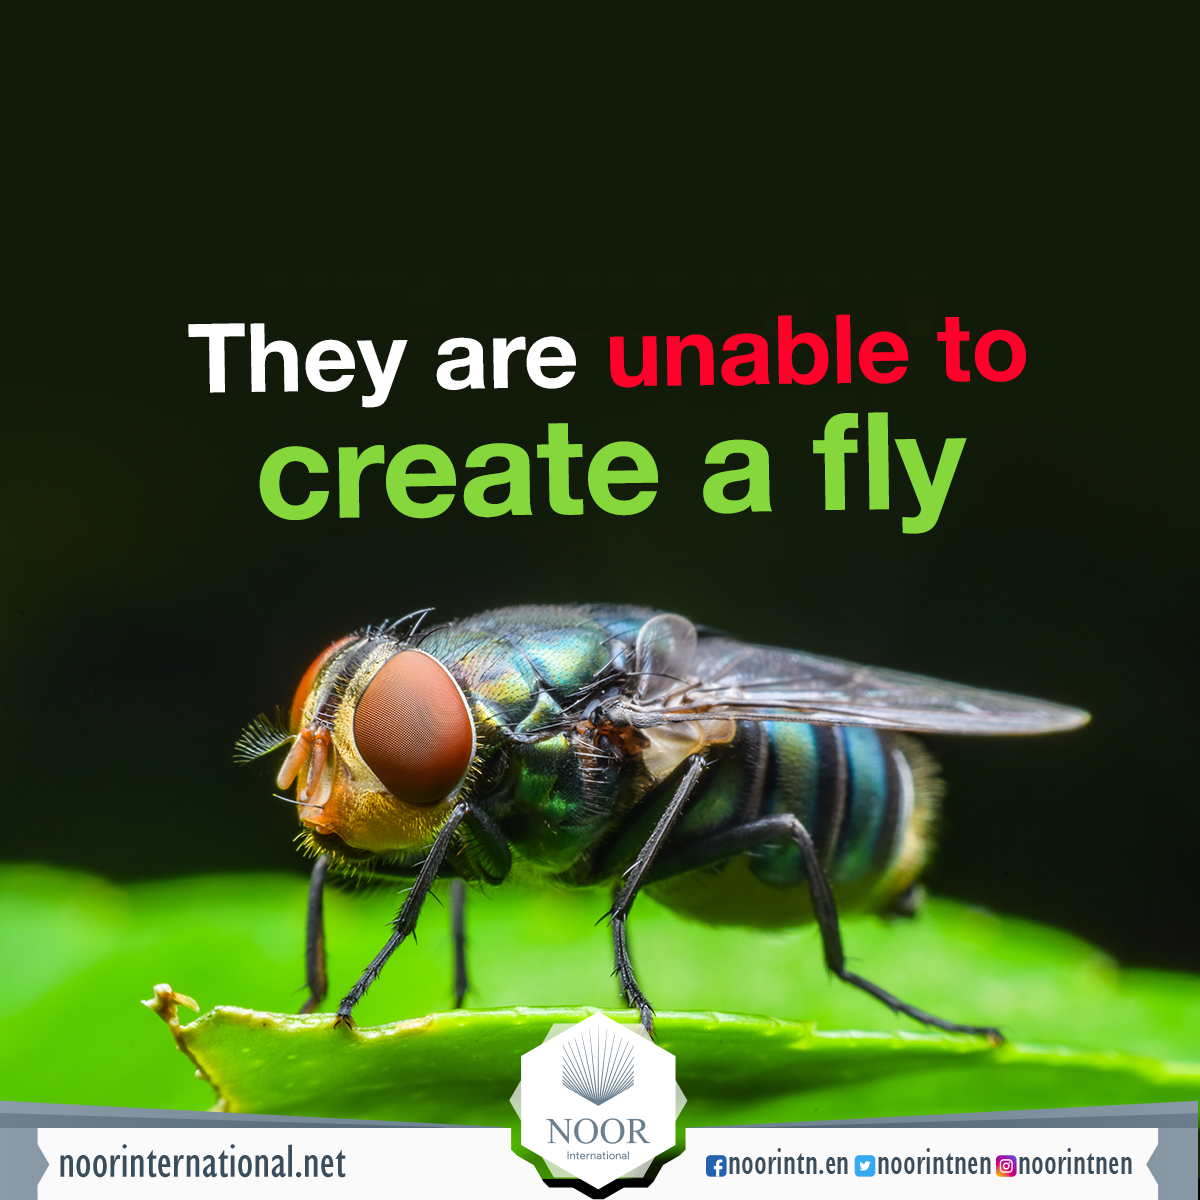 They are unable to create a fly